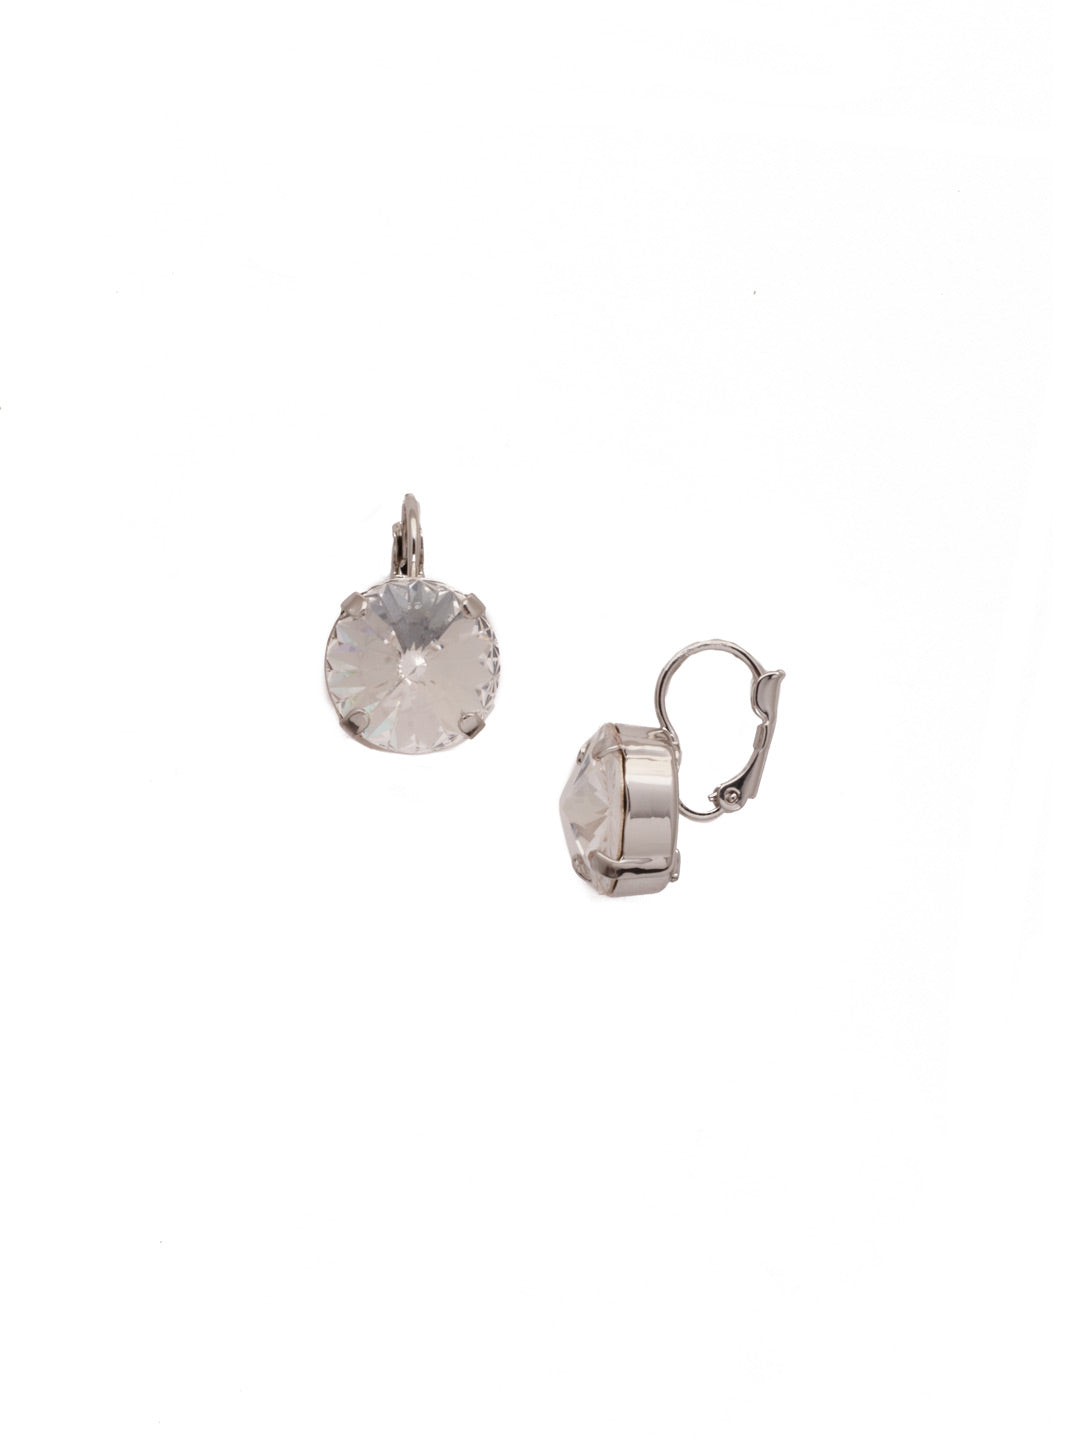 Radiant Round Dangle Earring - EDH108PDCRY - <p>Shine on! This bright, petite earring offers sparkle for days and integrated seamlessly into any look.. From Sorrelli's Crystal collection in our Palladium finish.</p>